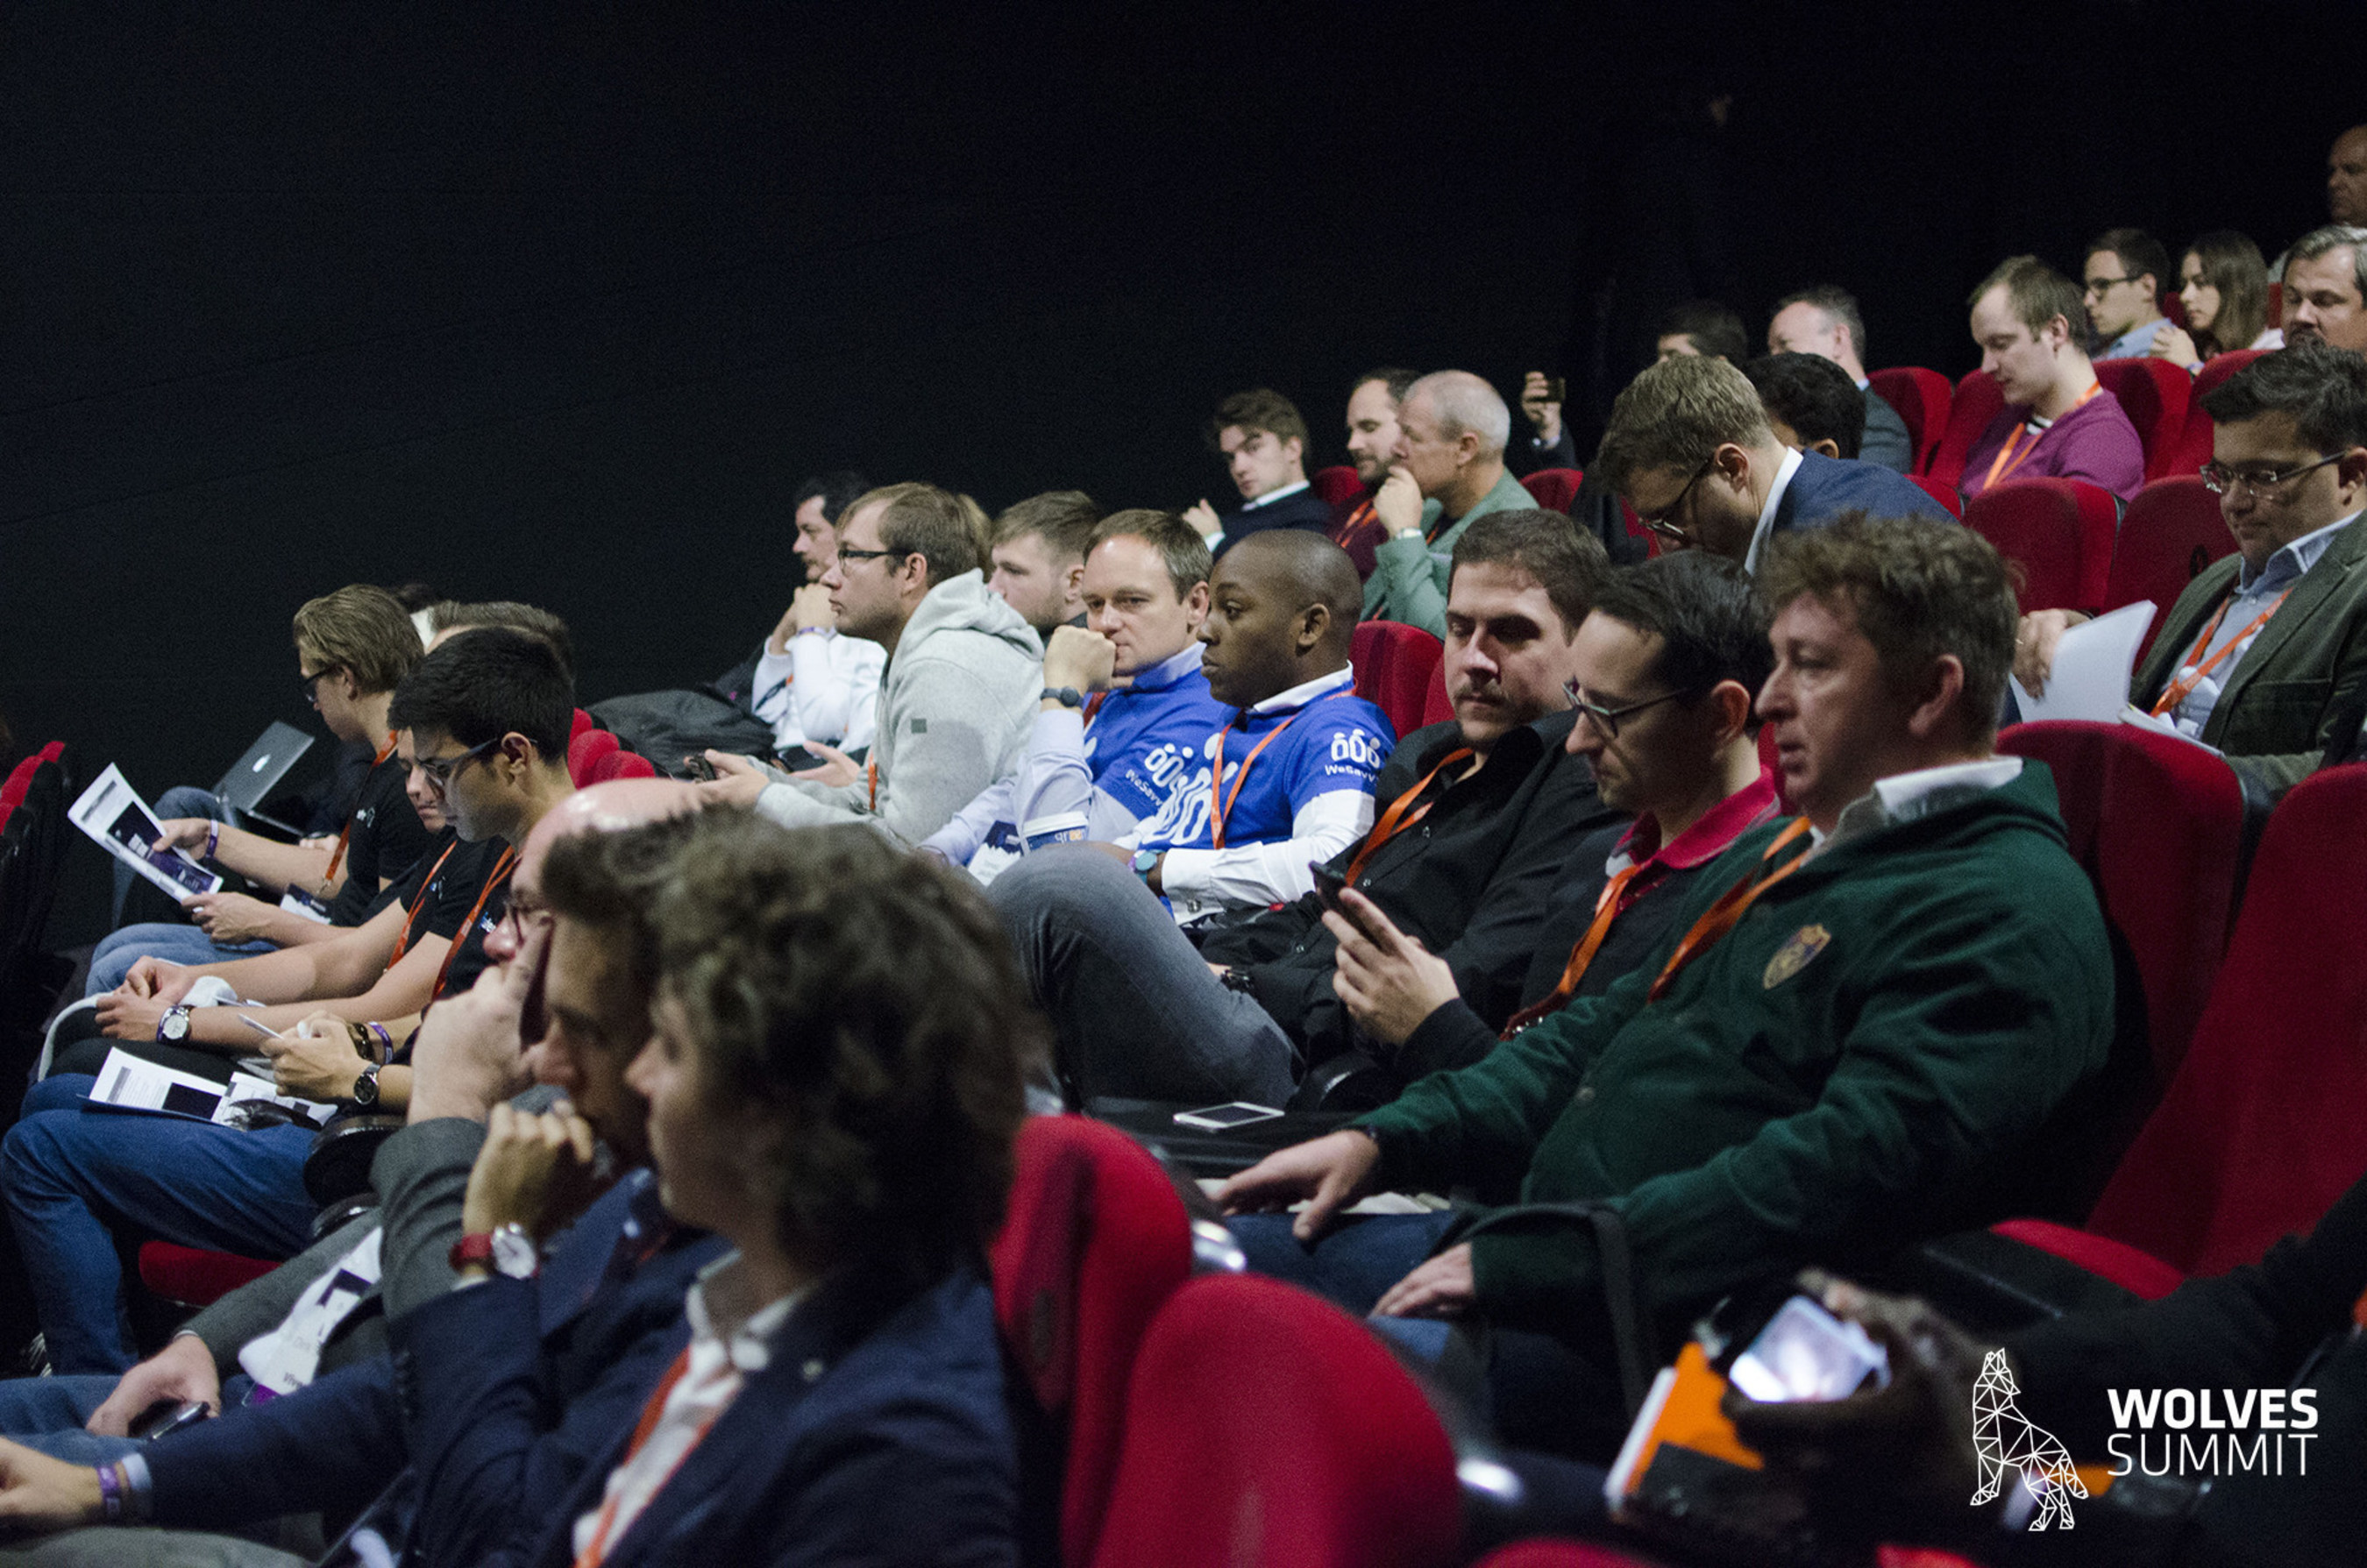 Audience at Wolves Summit (PRNewsFoto/Wolves Summit)